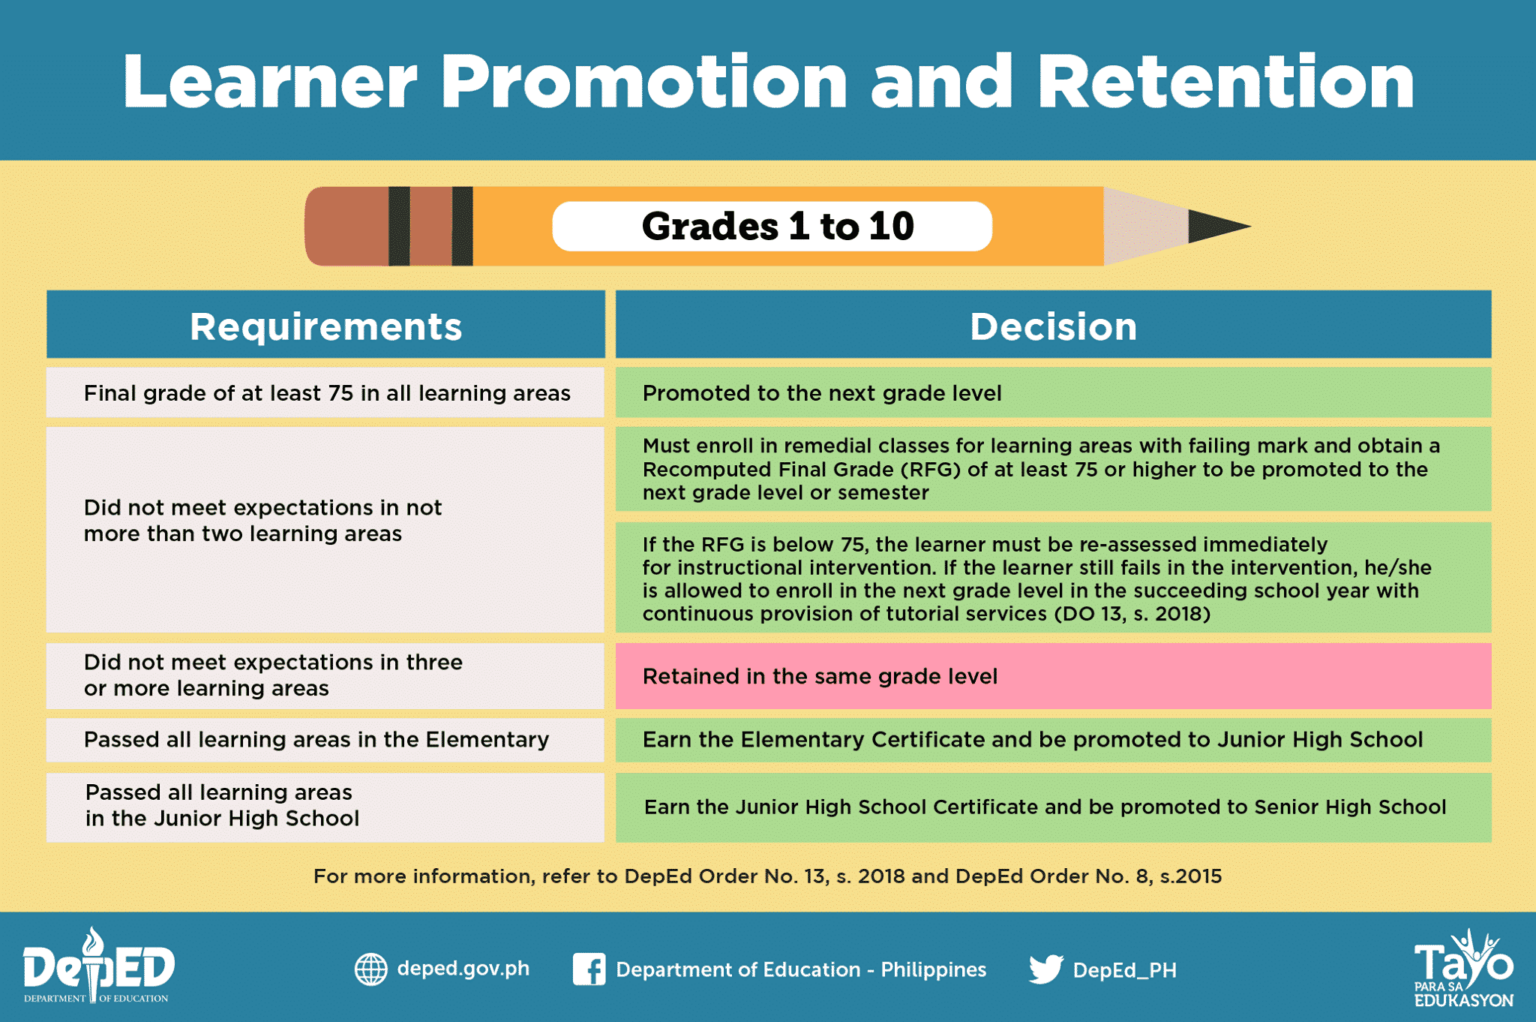 DepEd Guidelines on the Learner Promotion and Retention TeacherPH